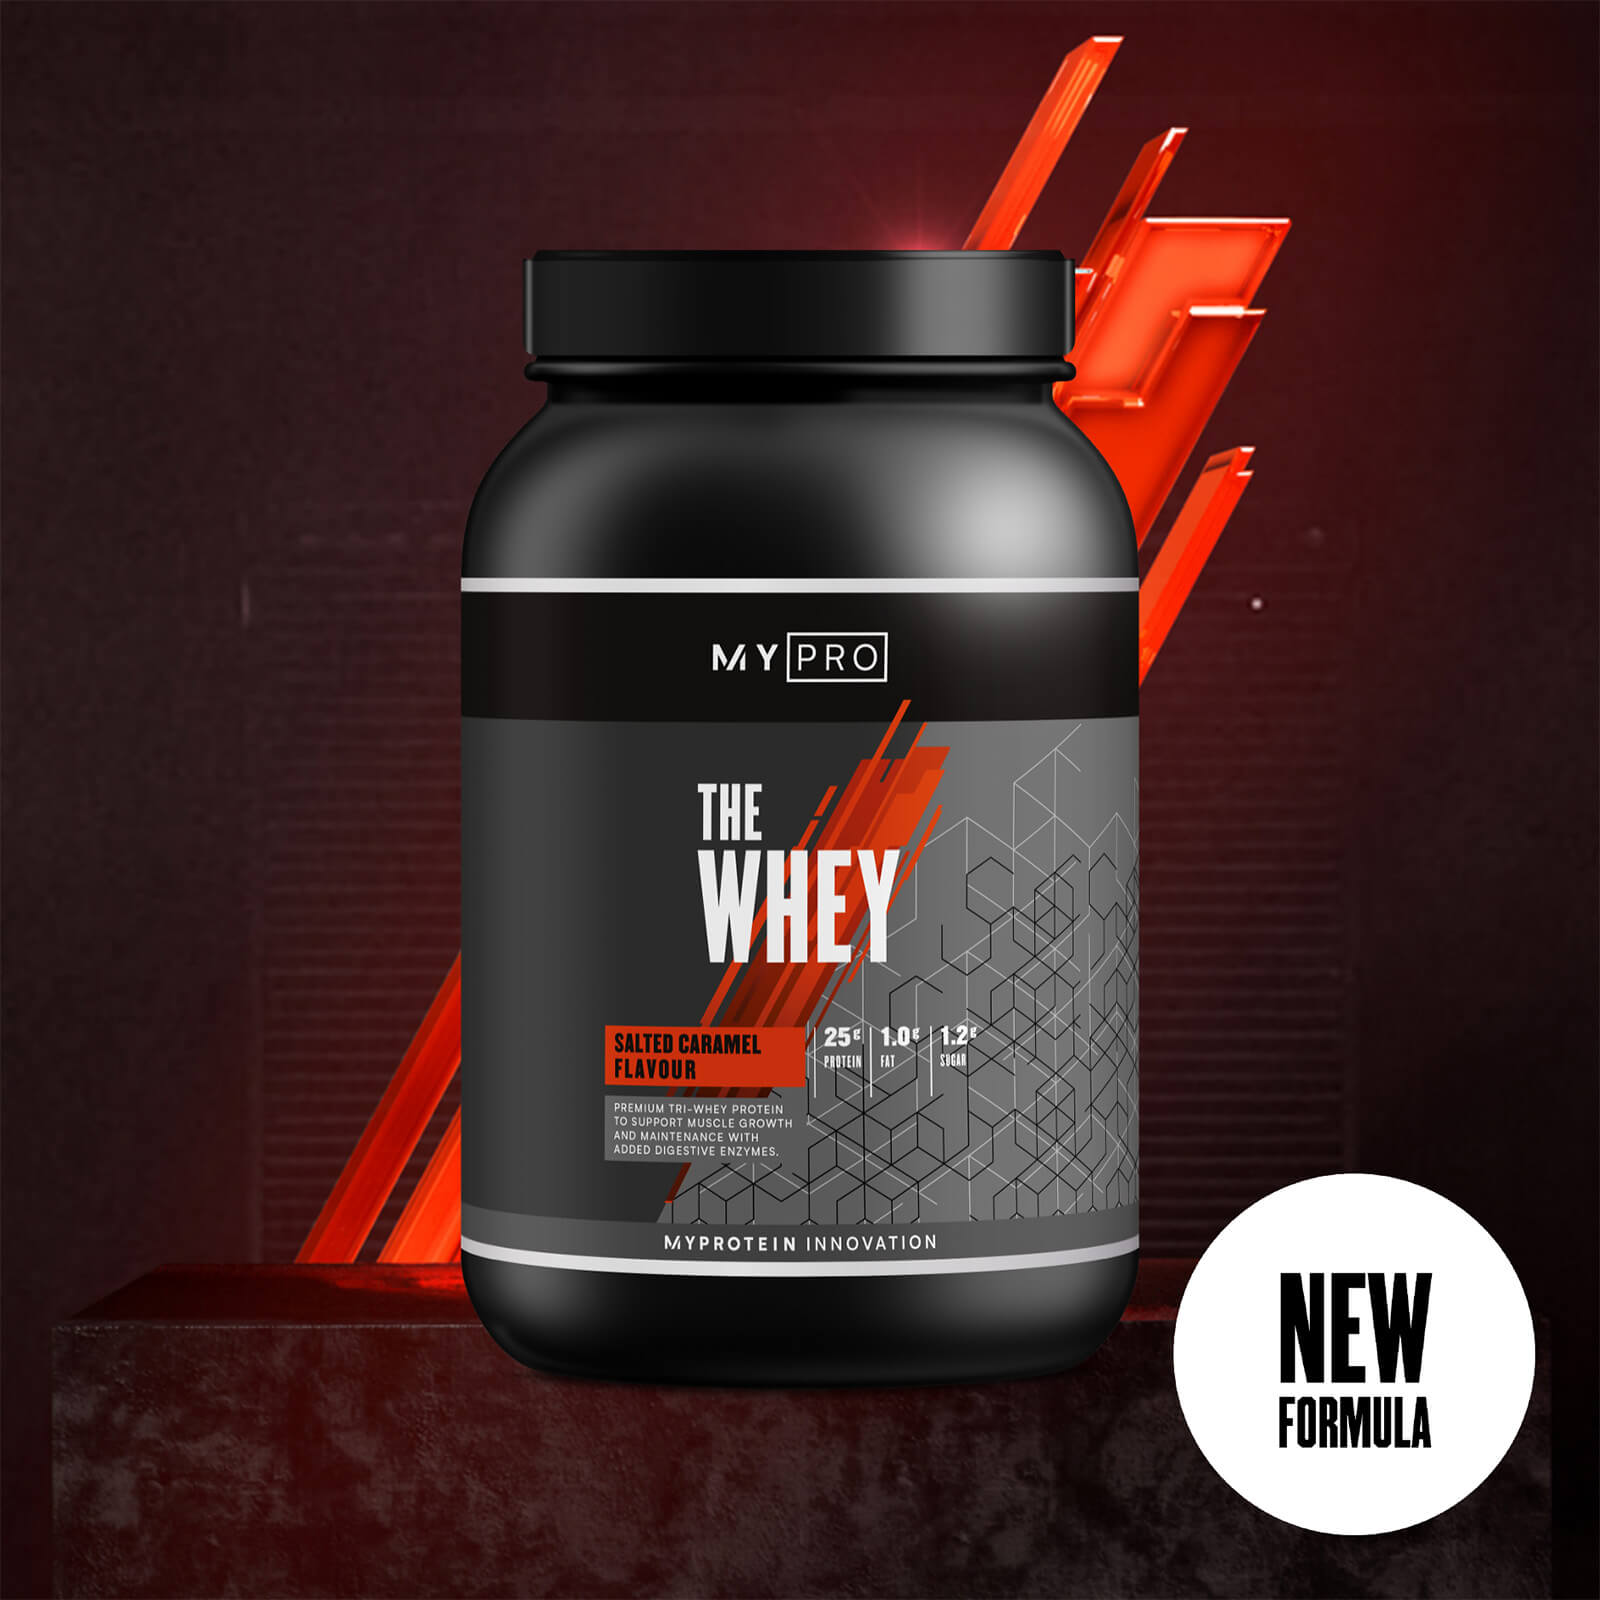 Myprotein THE Whey - 30servings - Salted Caramel